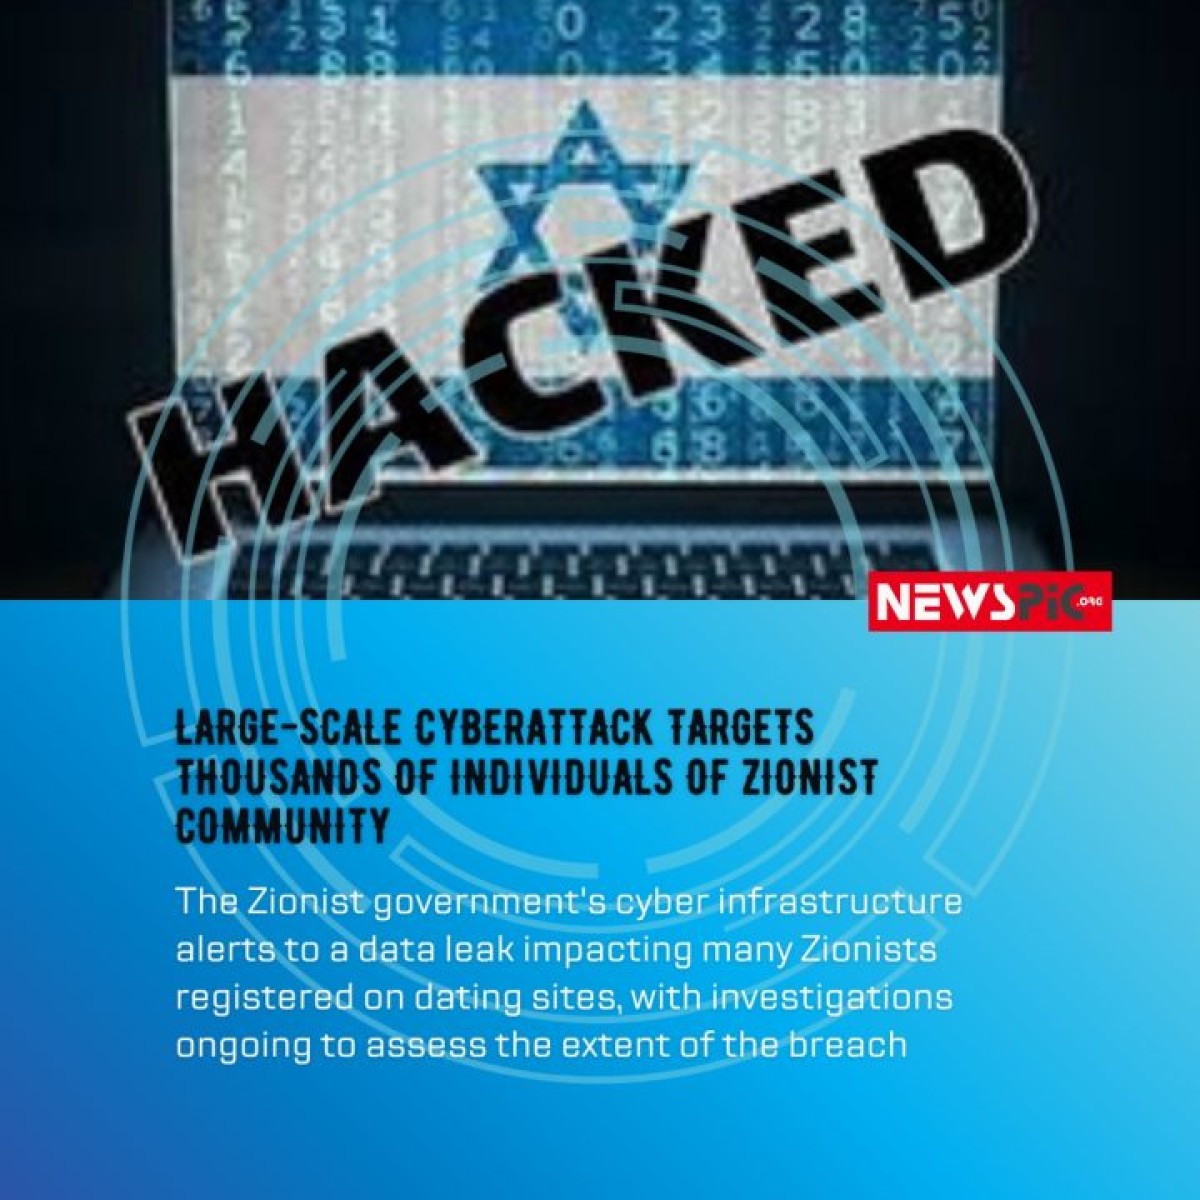 LARGESCALE CYBERATTACK TARGETS THOUSANDS OF INDIVIDUALS OF ZIONIST COMMUNITY